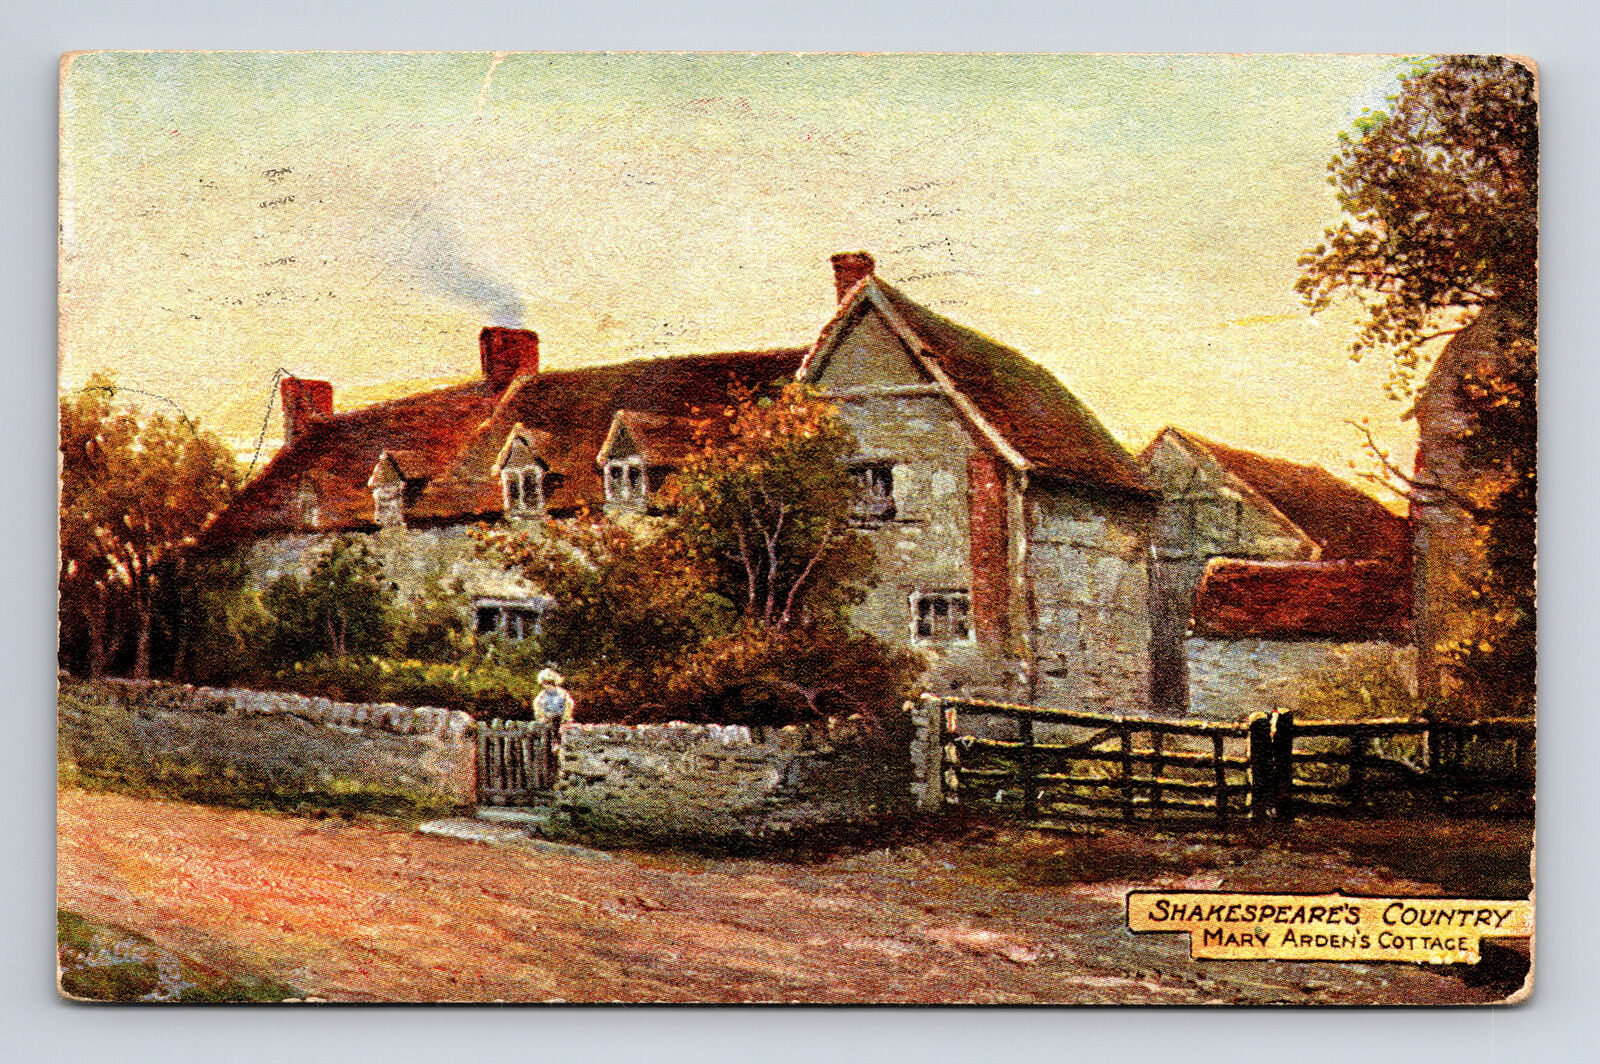 c1907 Mary Arden\'s Cottage Shakespeare\'s Country Raphael Tuck\'s Oilette Postcard